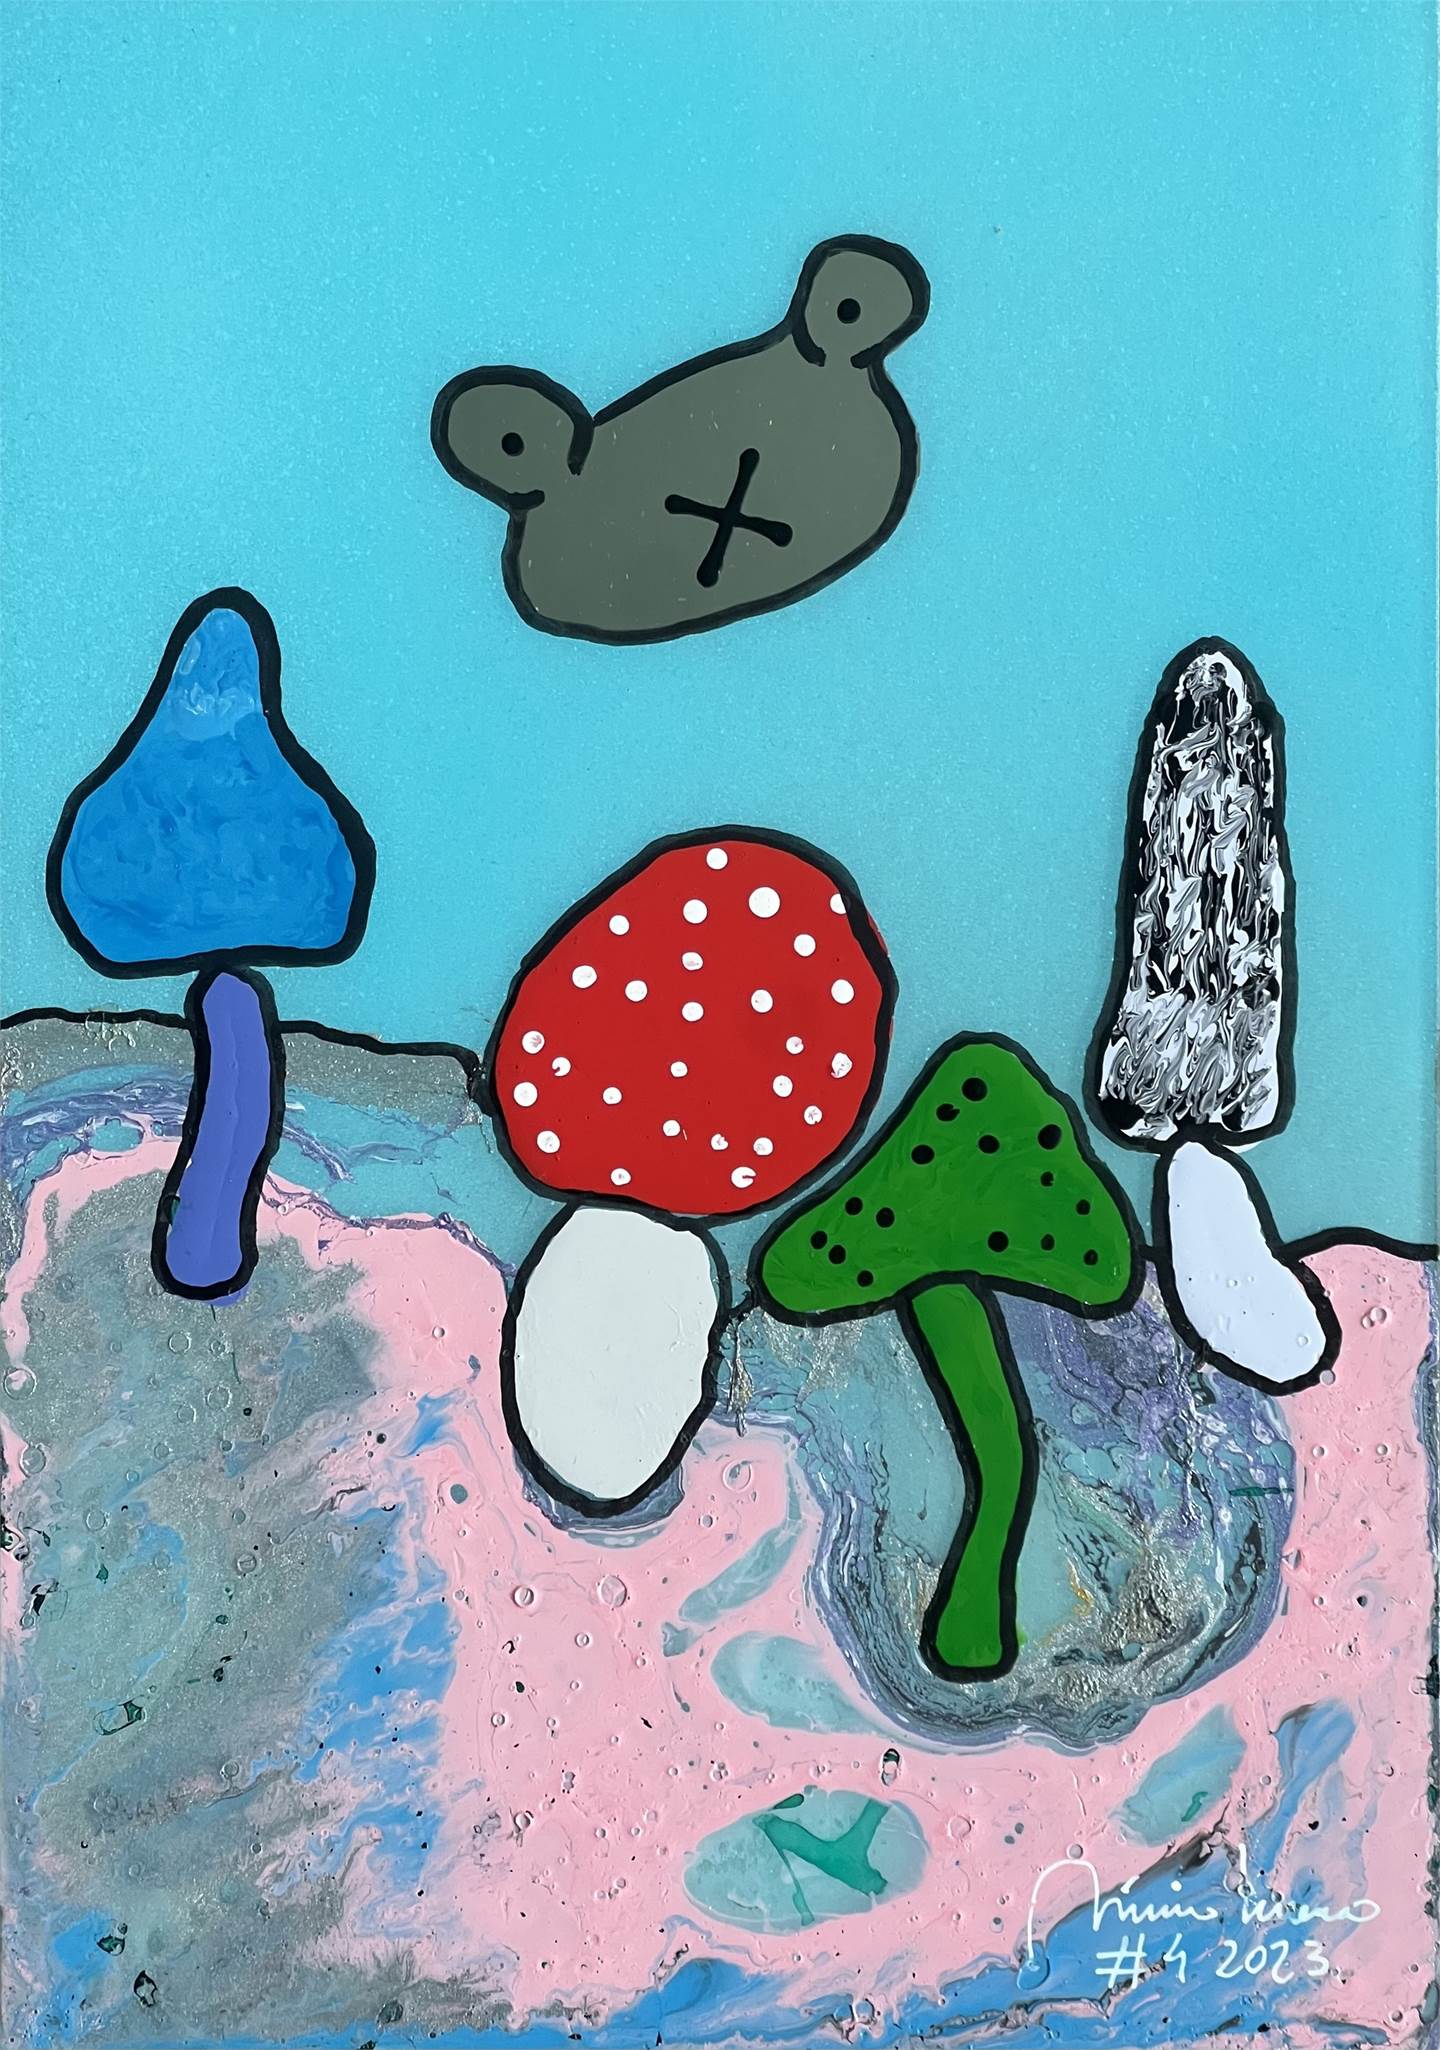 The mushrooms and the cloud #4, original   Painting by Mario Louro